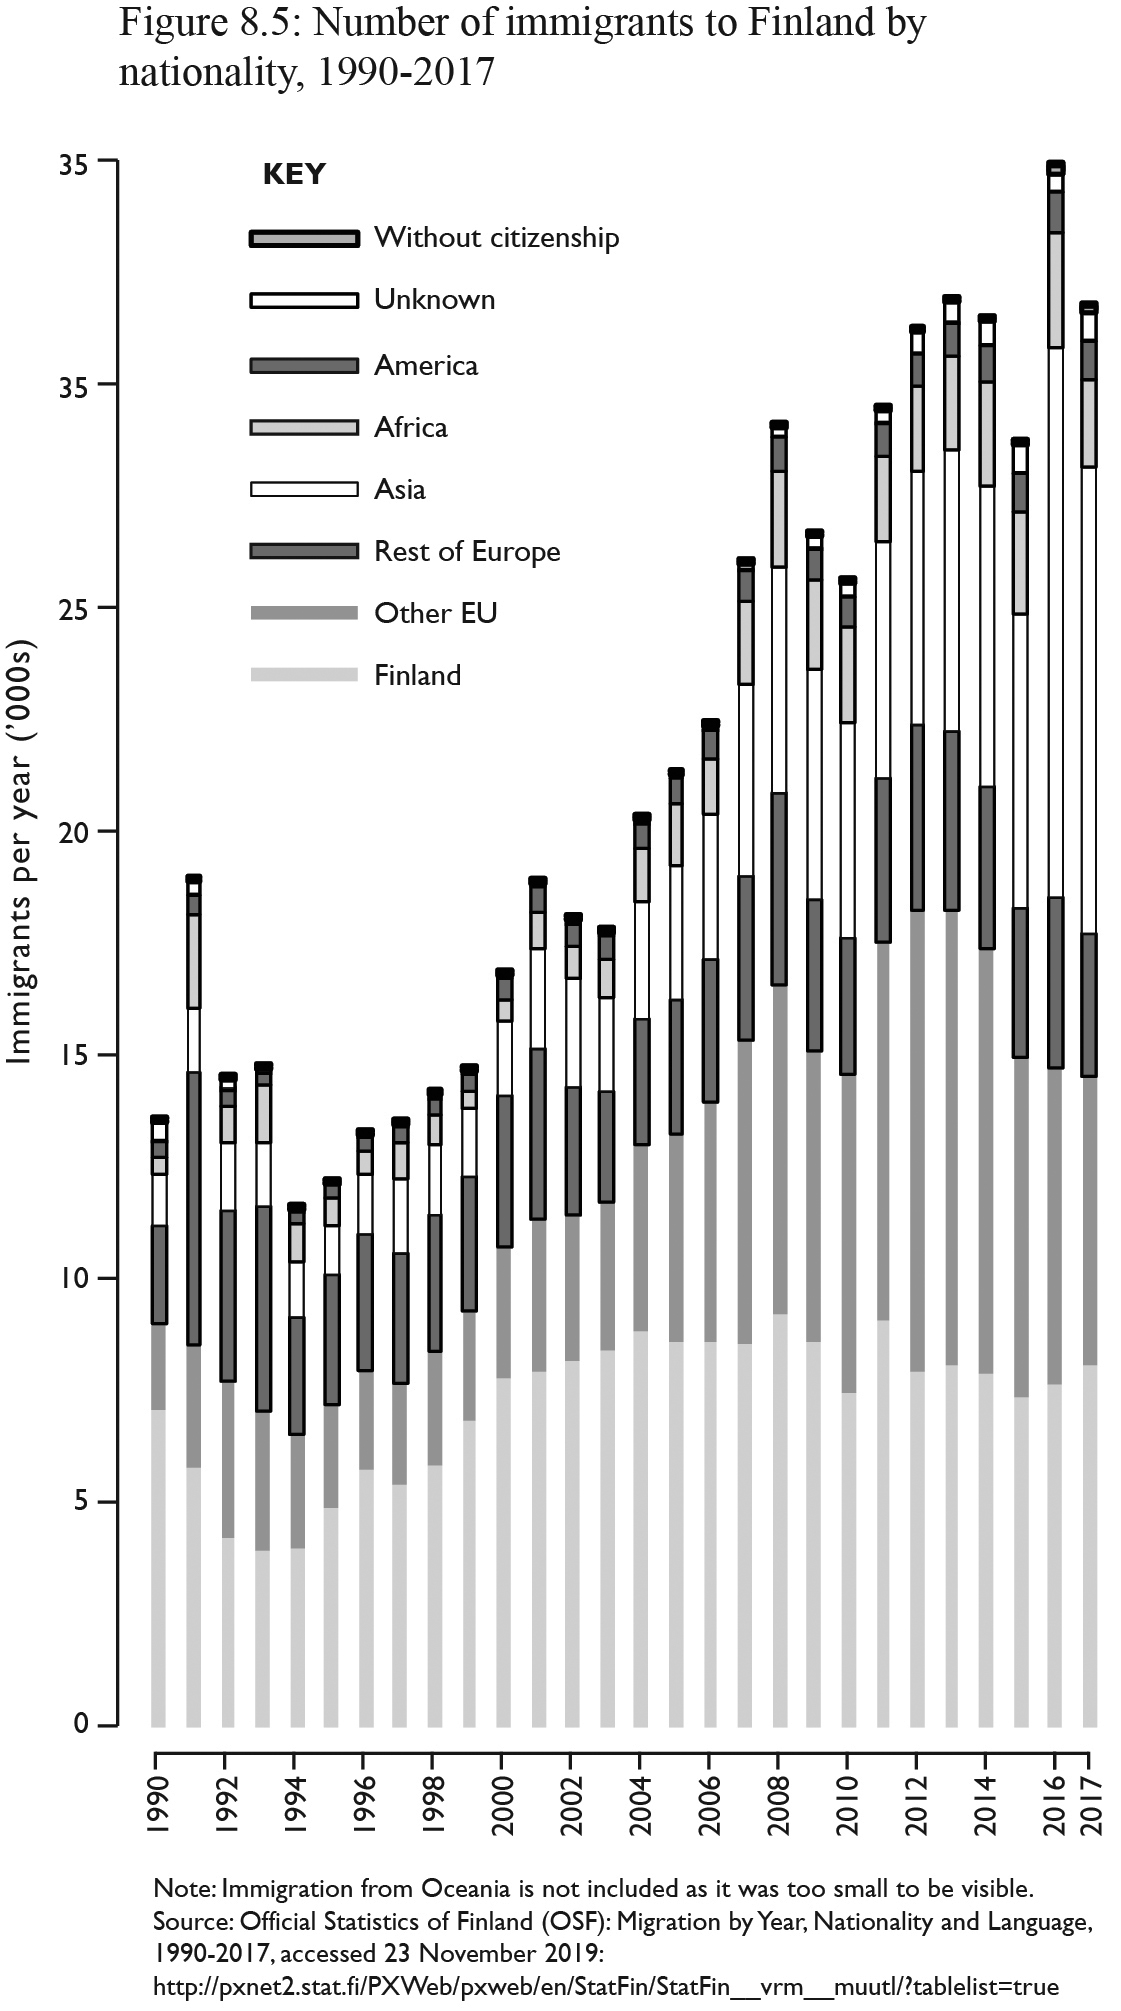 Figure 8.5: Source: Official Statistics of Finland (OSF): Migration by Year, Nationality and Language, 1990-2017, , accessed 23 November 2019,  http://pxnet2.stat.fi/PXWeb/pxweb/en/StatFin/StatFin__vrm__muutl/?tablelist=true